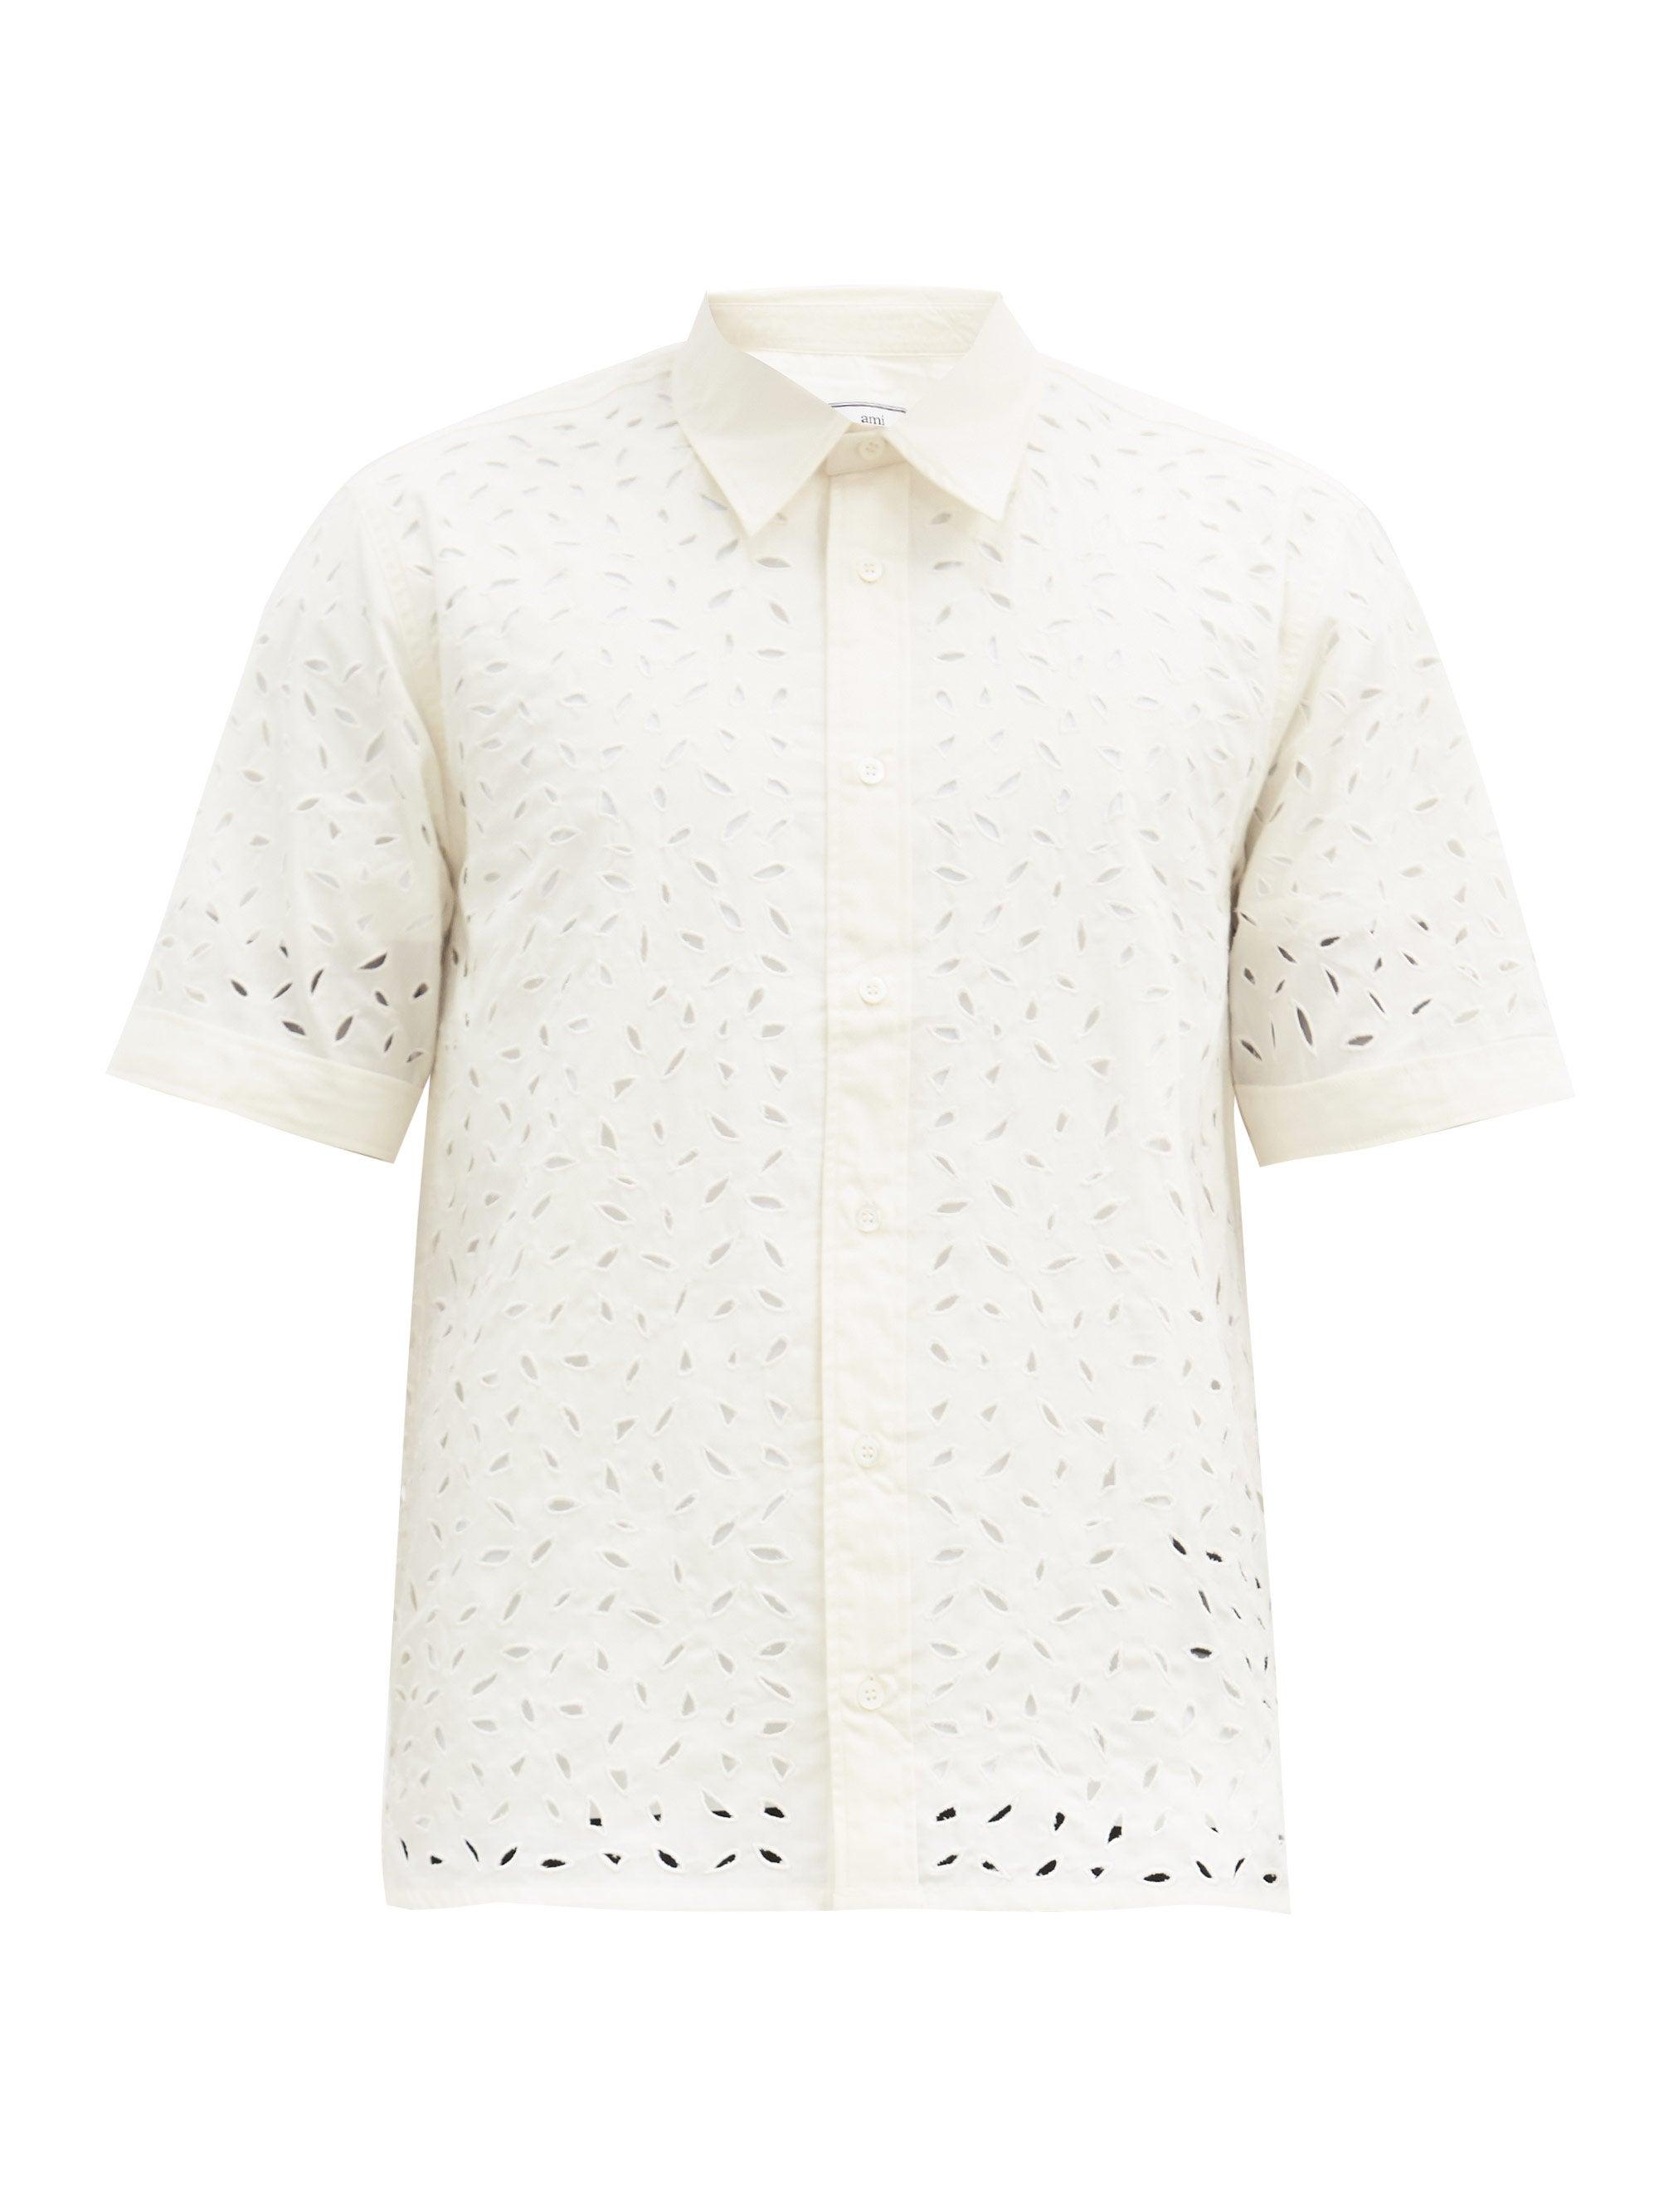 AMI Broderie-anglaise Cotton-poplin Shirt in Cream (Natural) for Men - Lyst